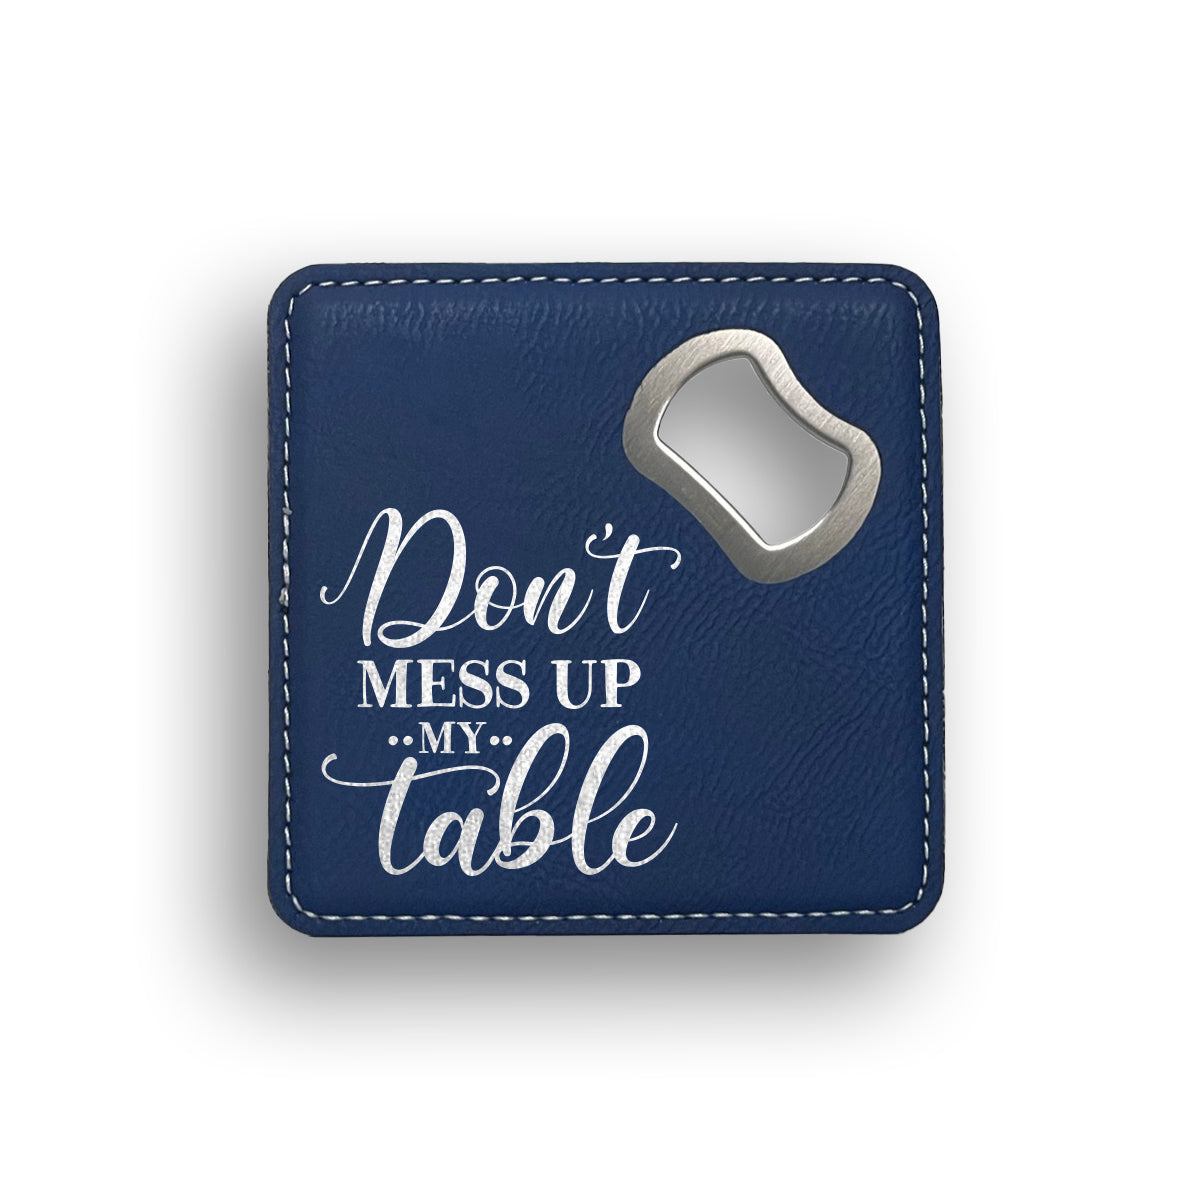 Don't Mess Up My Table Bottle Opener Coaster